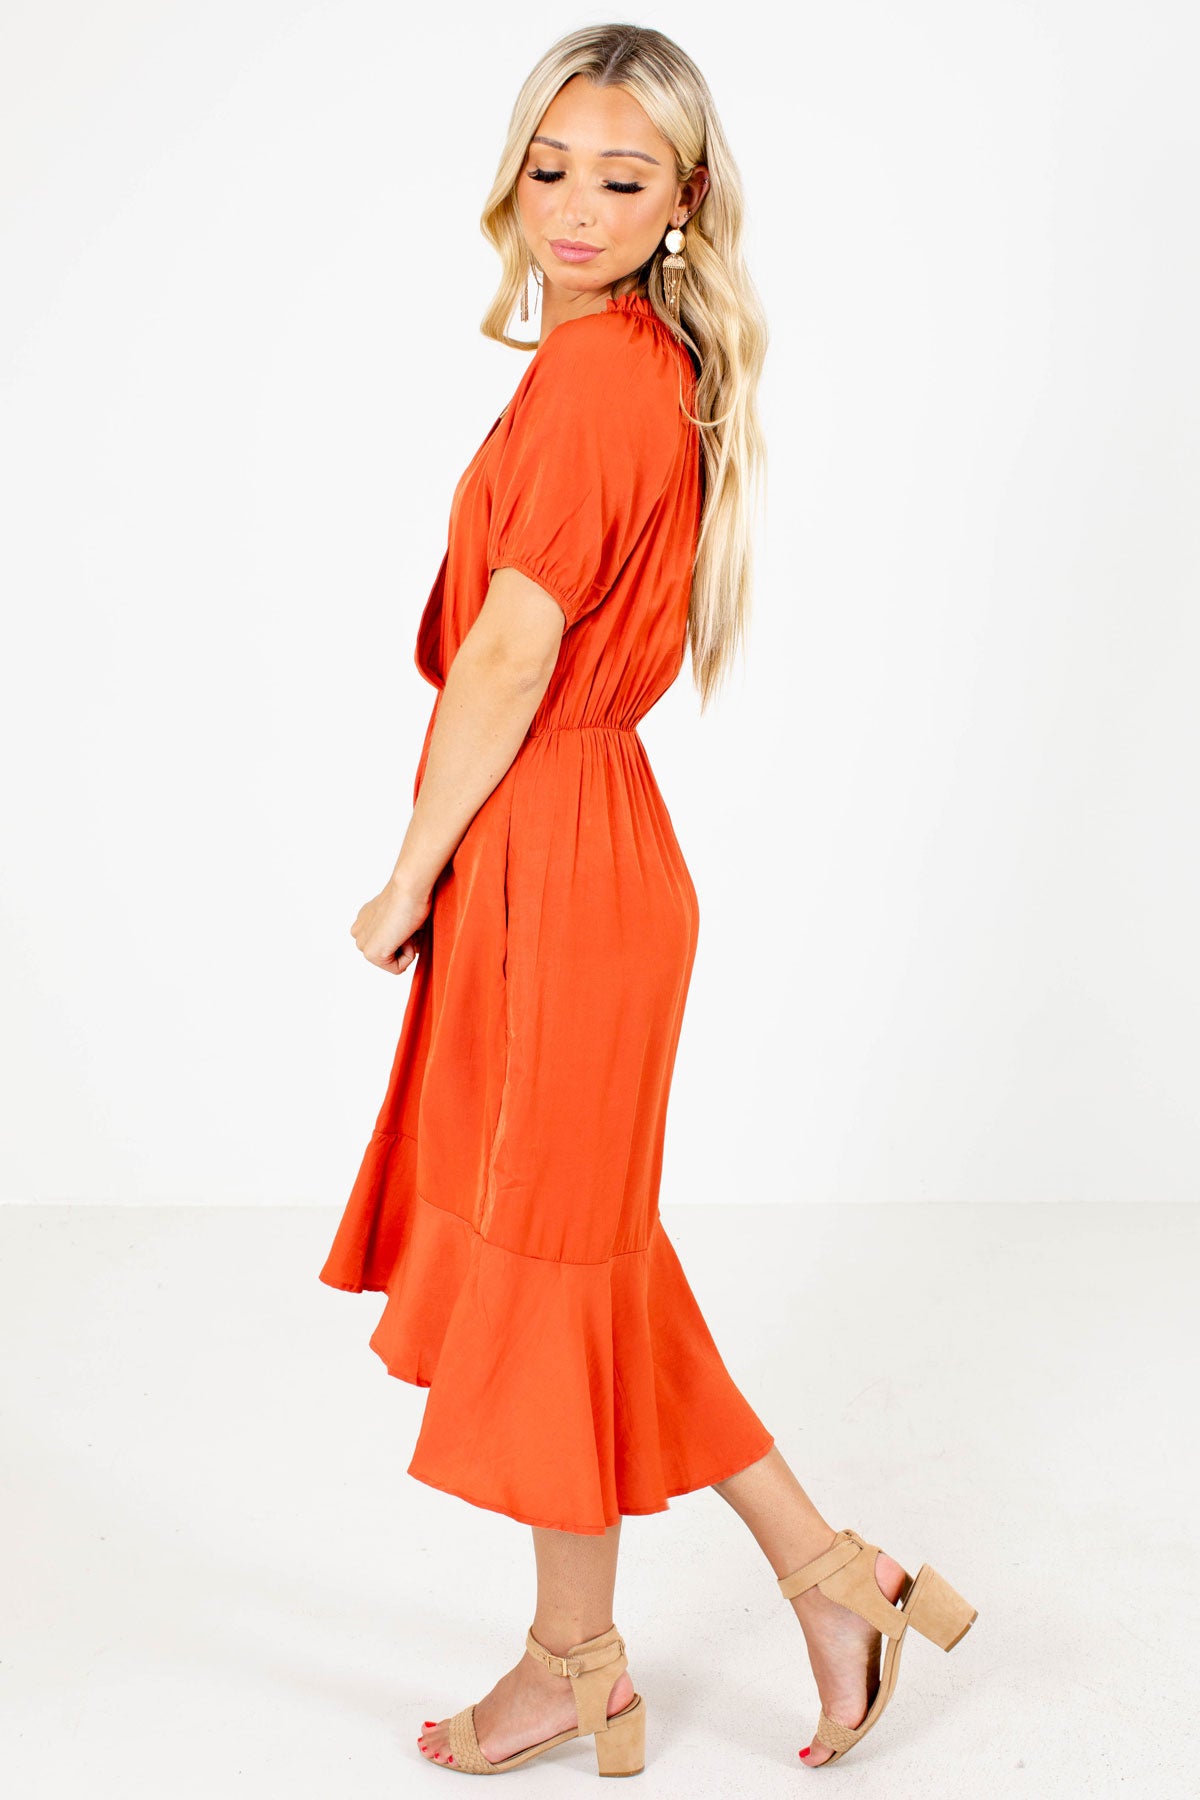 Orange Cute and Comfortable Boutique Knee-Length Dresses for Women